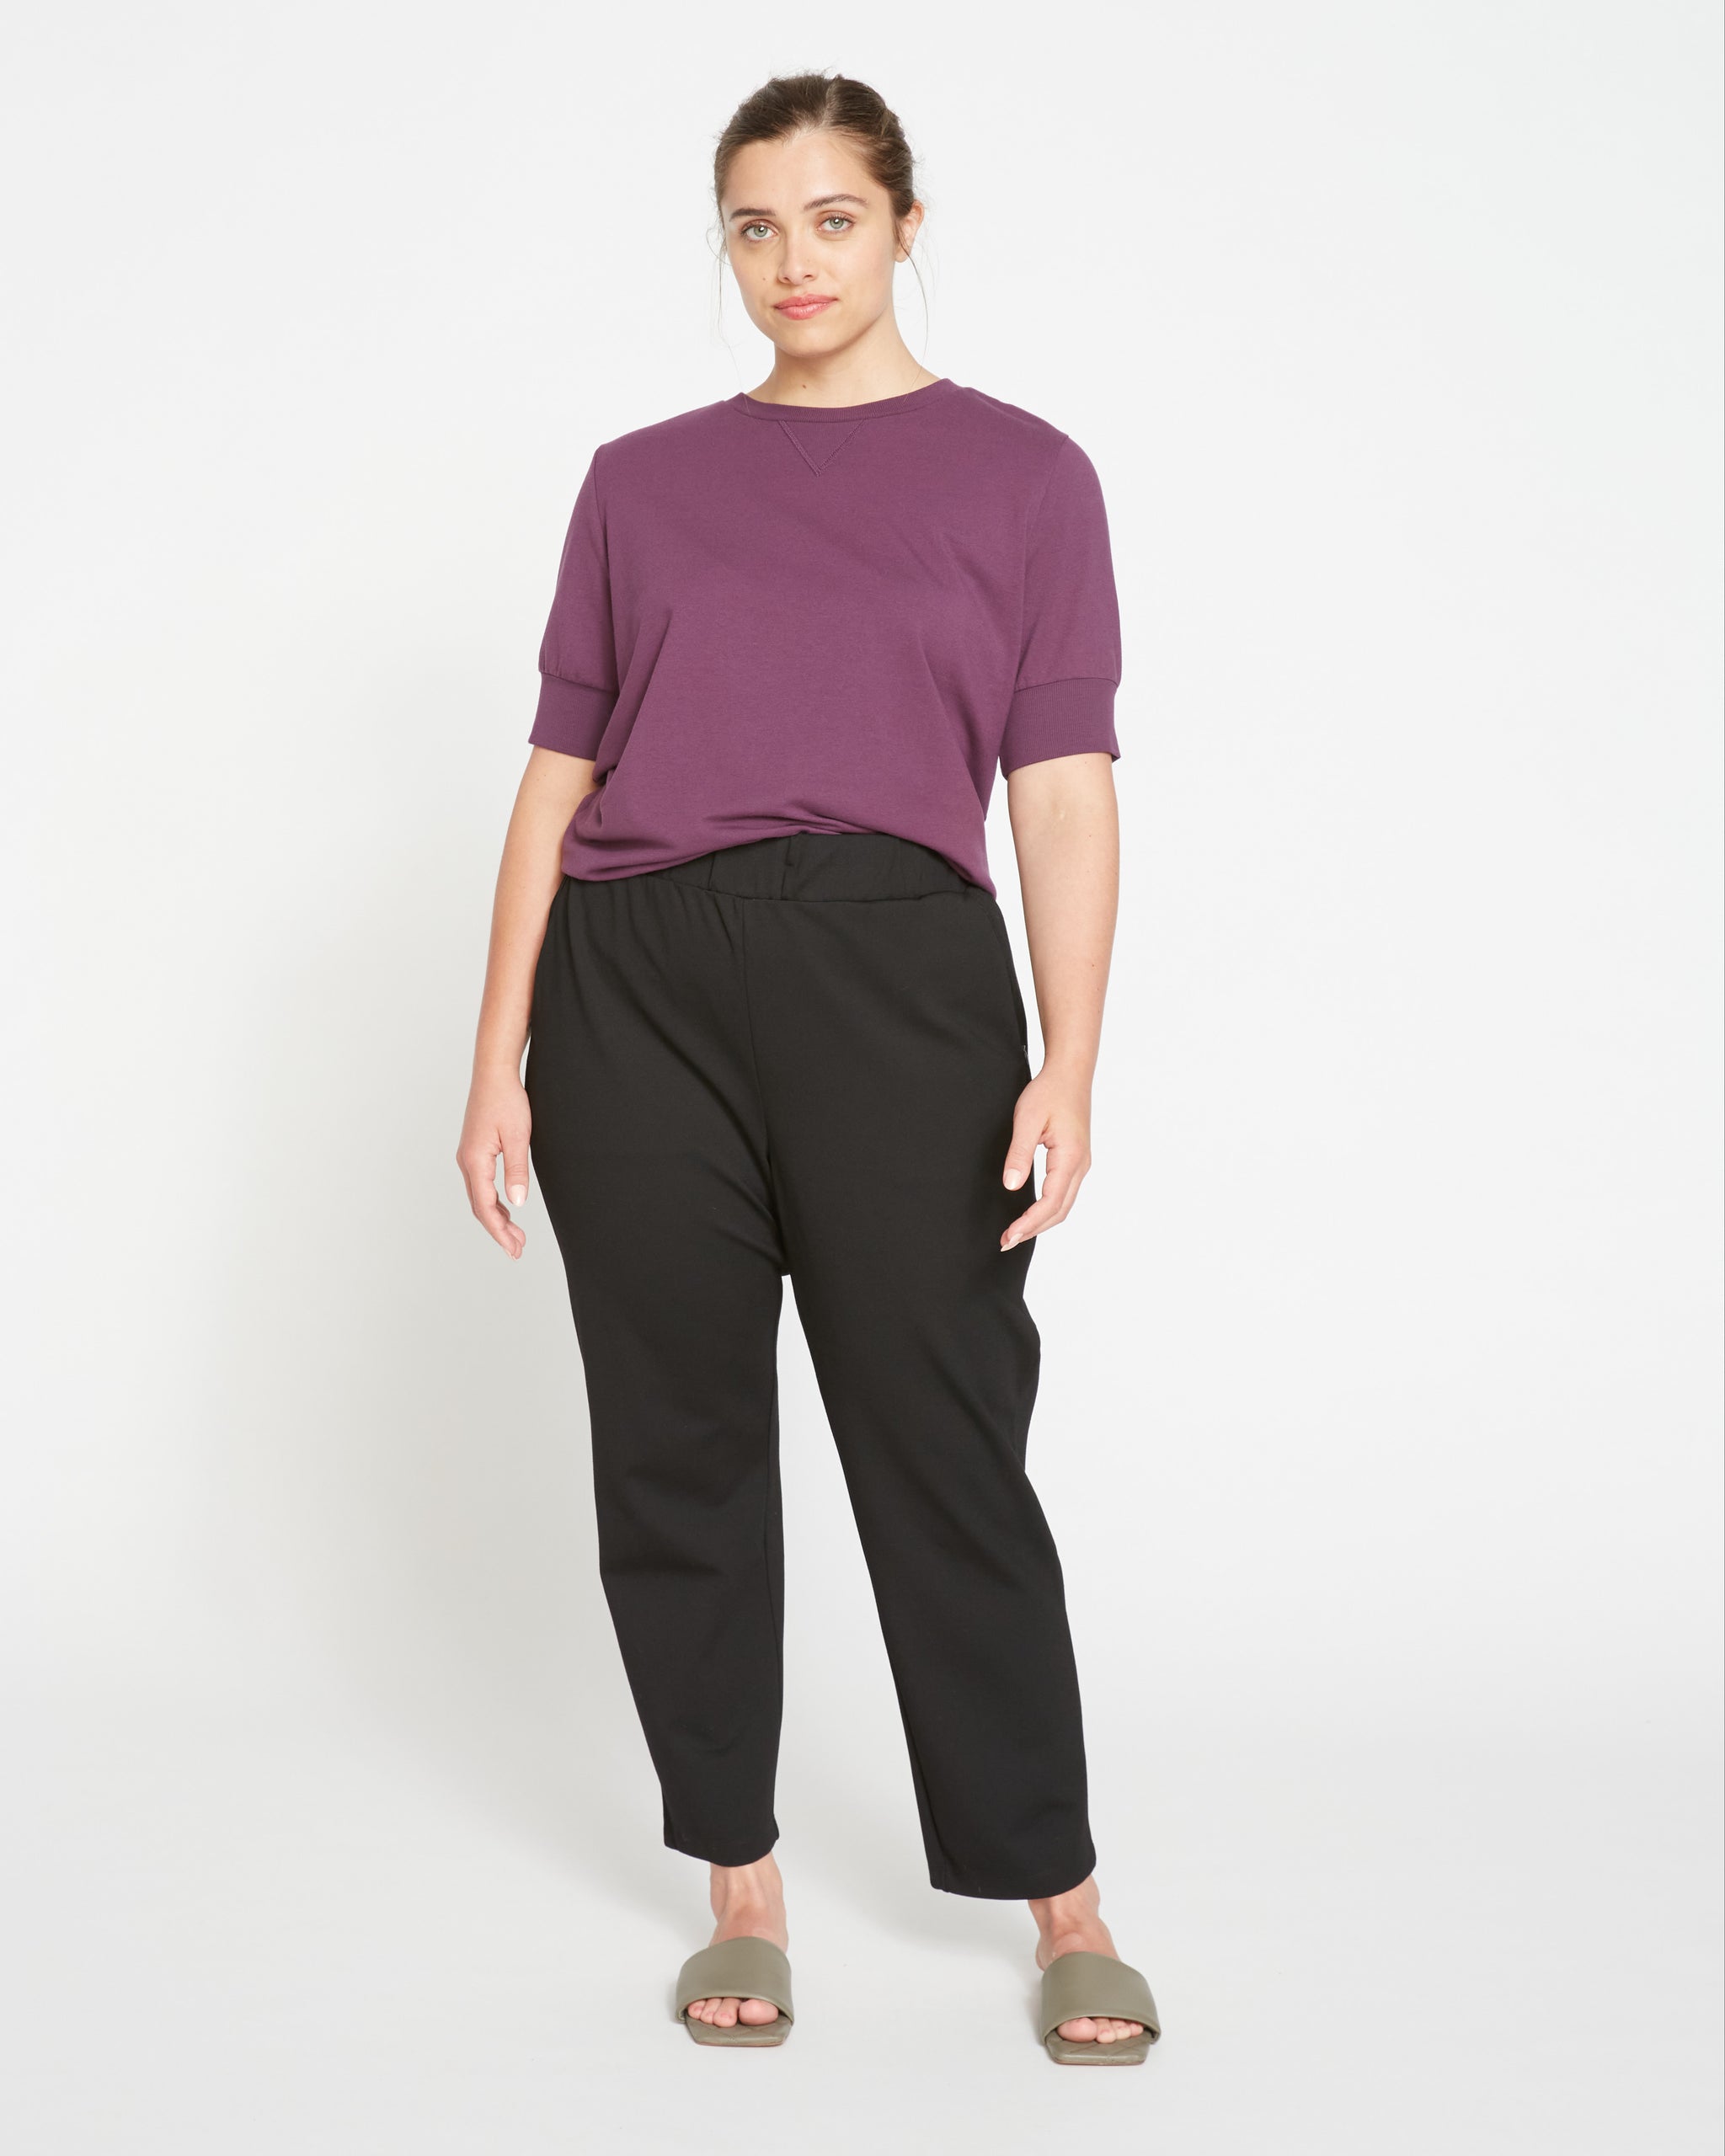 Kobomo - Ponte Jogger Pants are a smart casual winter stretch pant.  Tapering to the ankle with button features on the leg cuff, these dressy  joggers are one of the smartest and